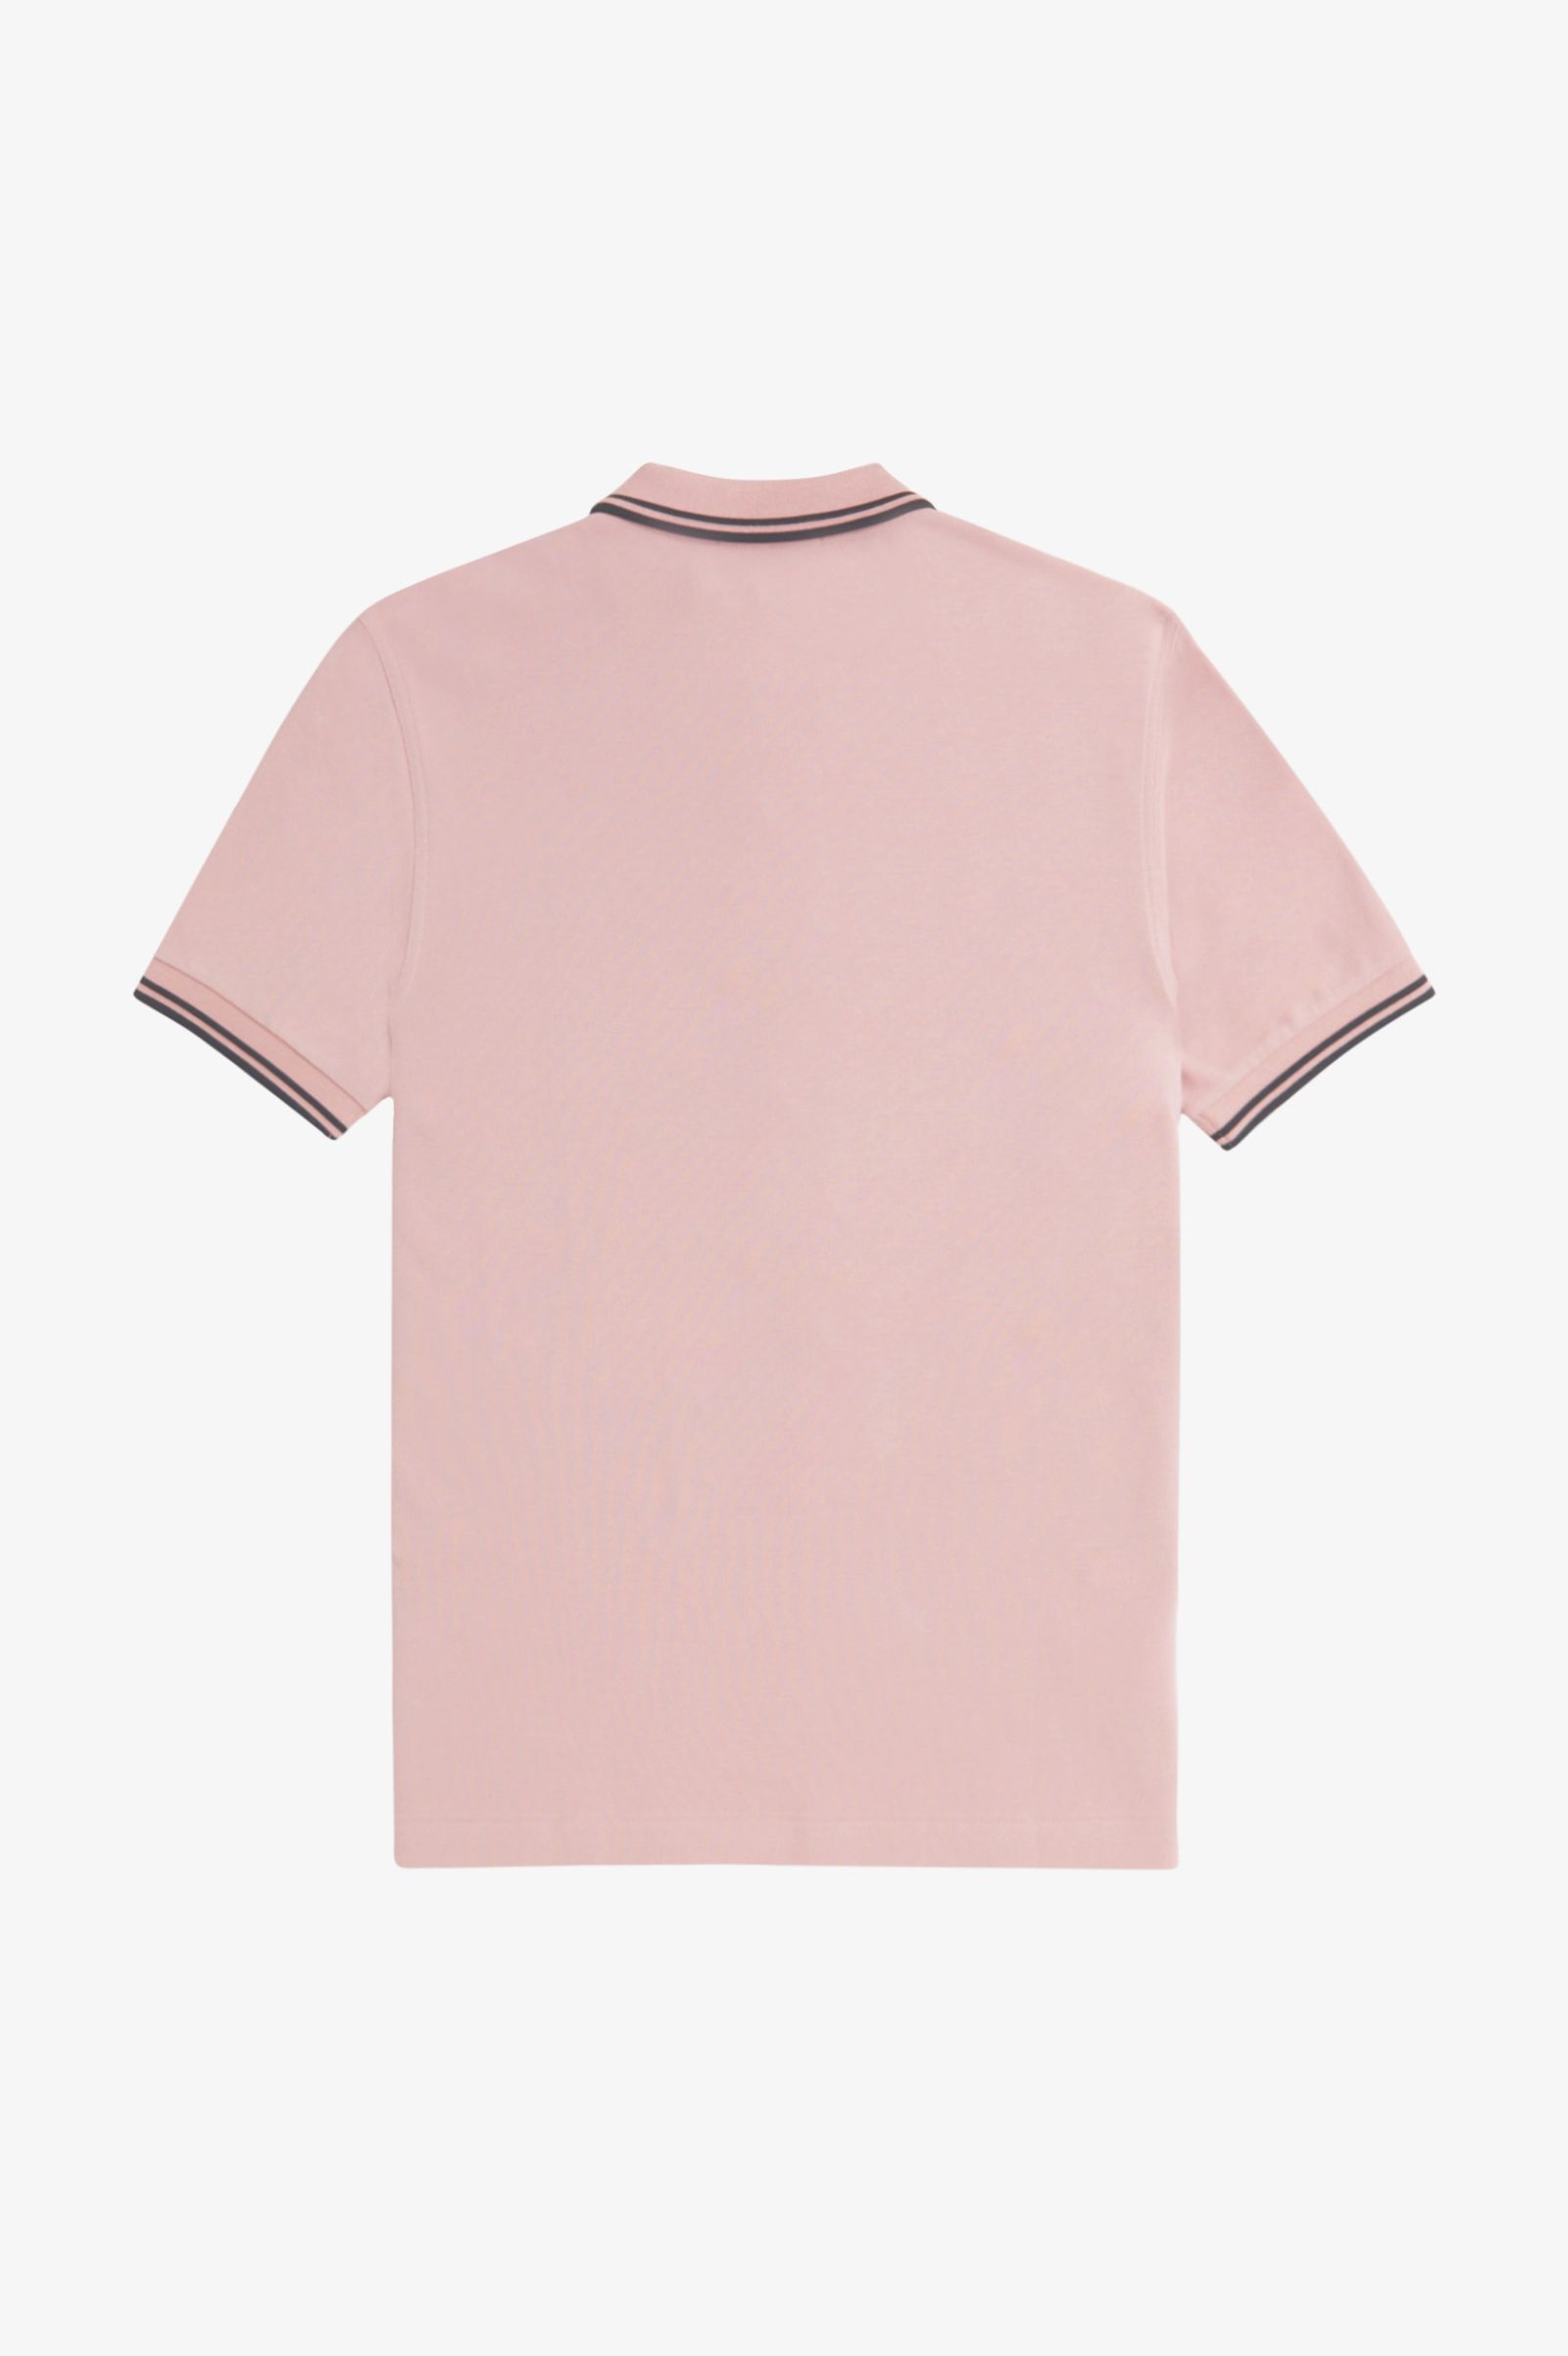 Fred Perry Twin Tipped Shirt M3600 in Dusty Rose Pink / Black 